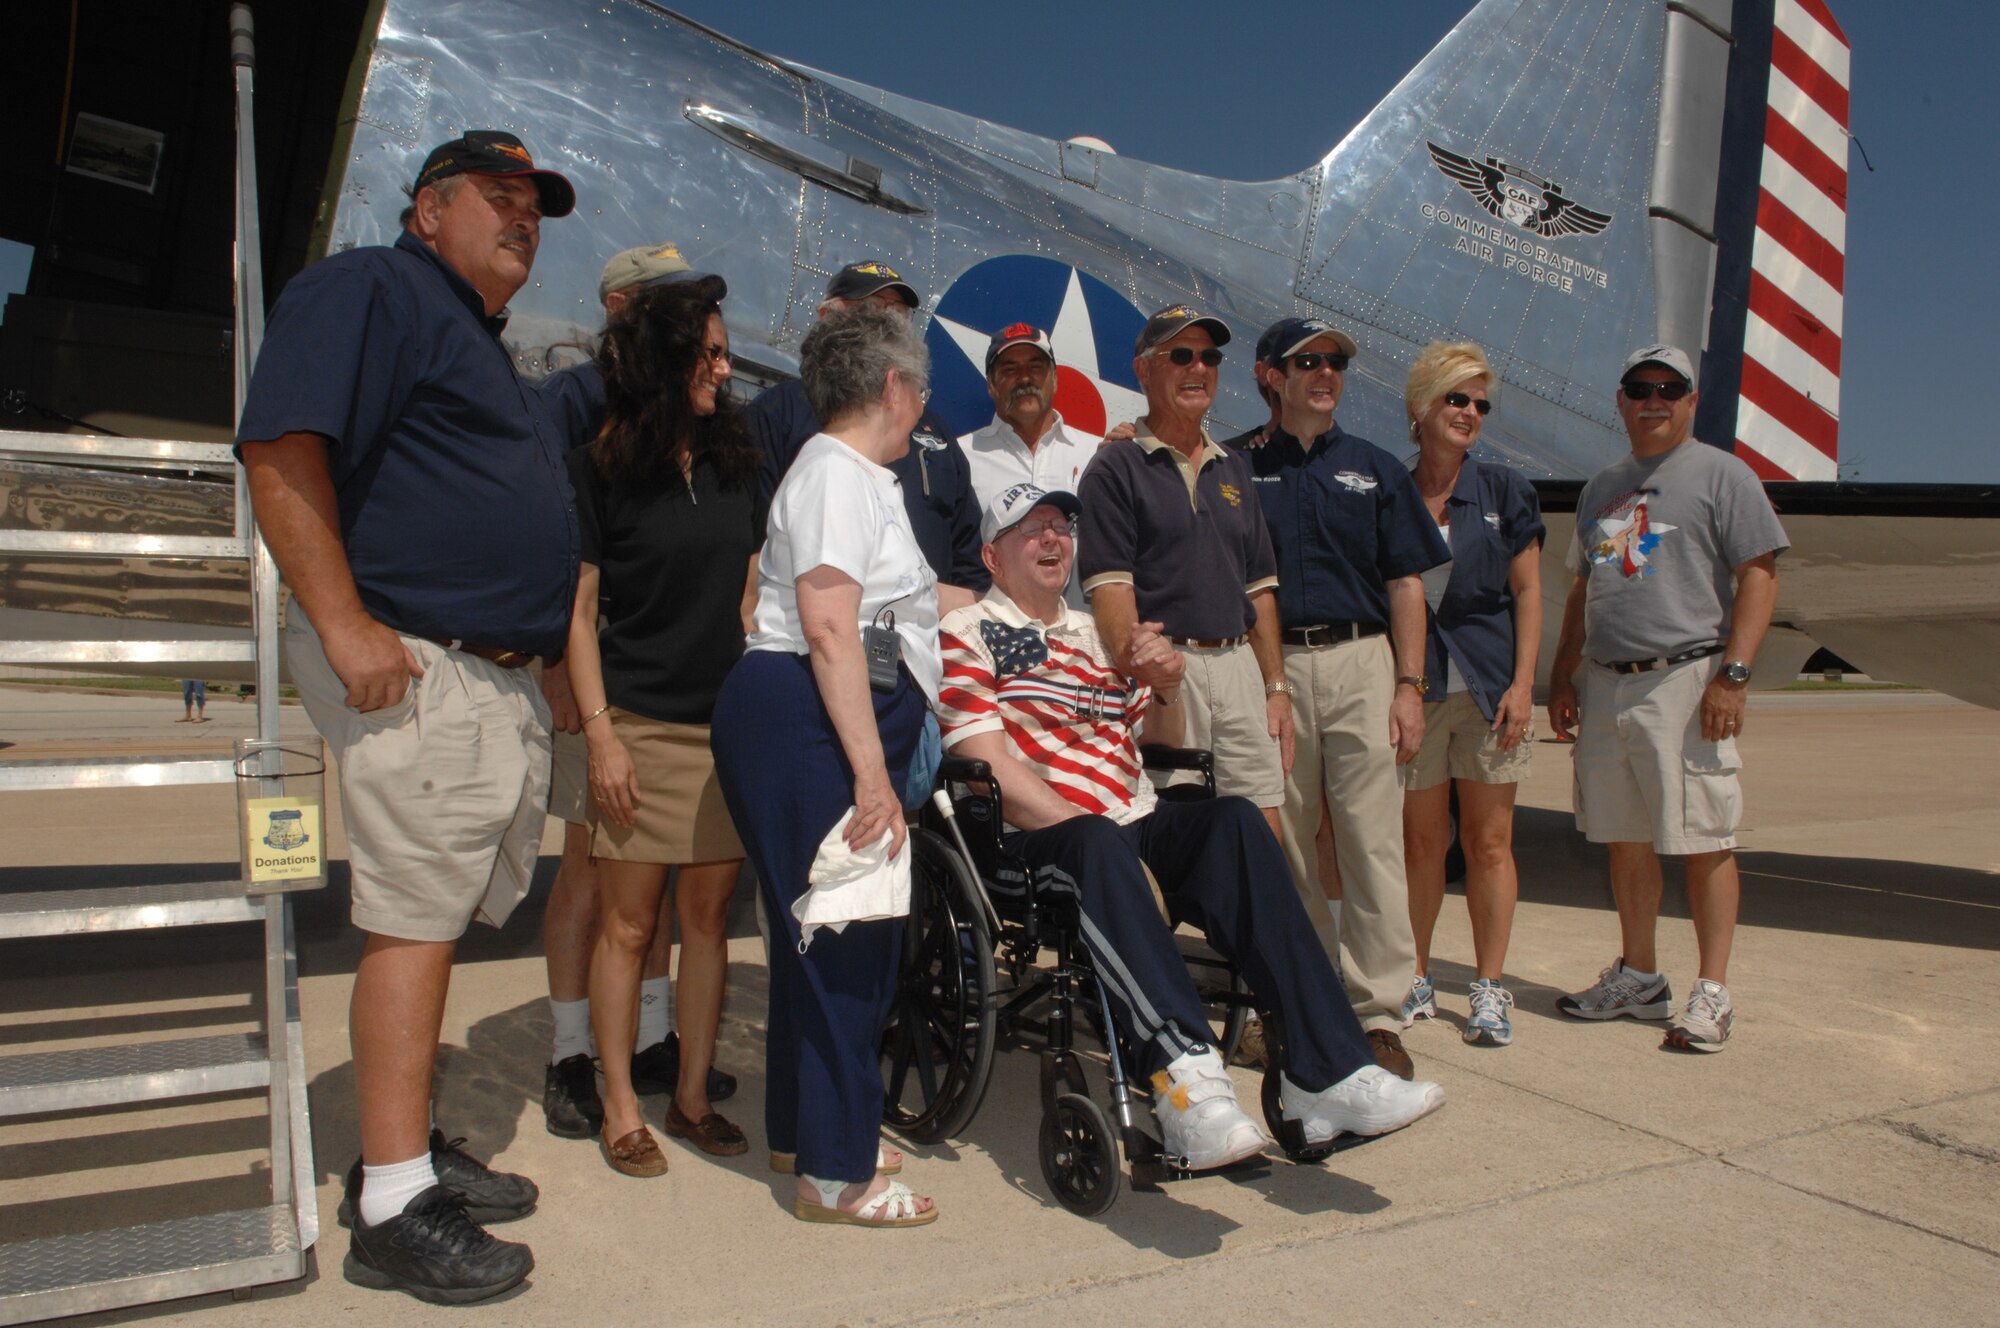 The team from the Commemorative Air Force pose with retired Master Sgt. Harry Siegrist and his wife outside the Bluebonnet Belle. (U.S. Air Force photo by Tech. Sgt. John Barton)